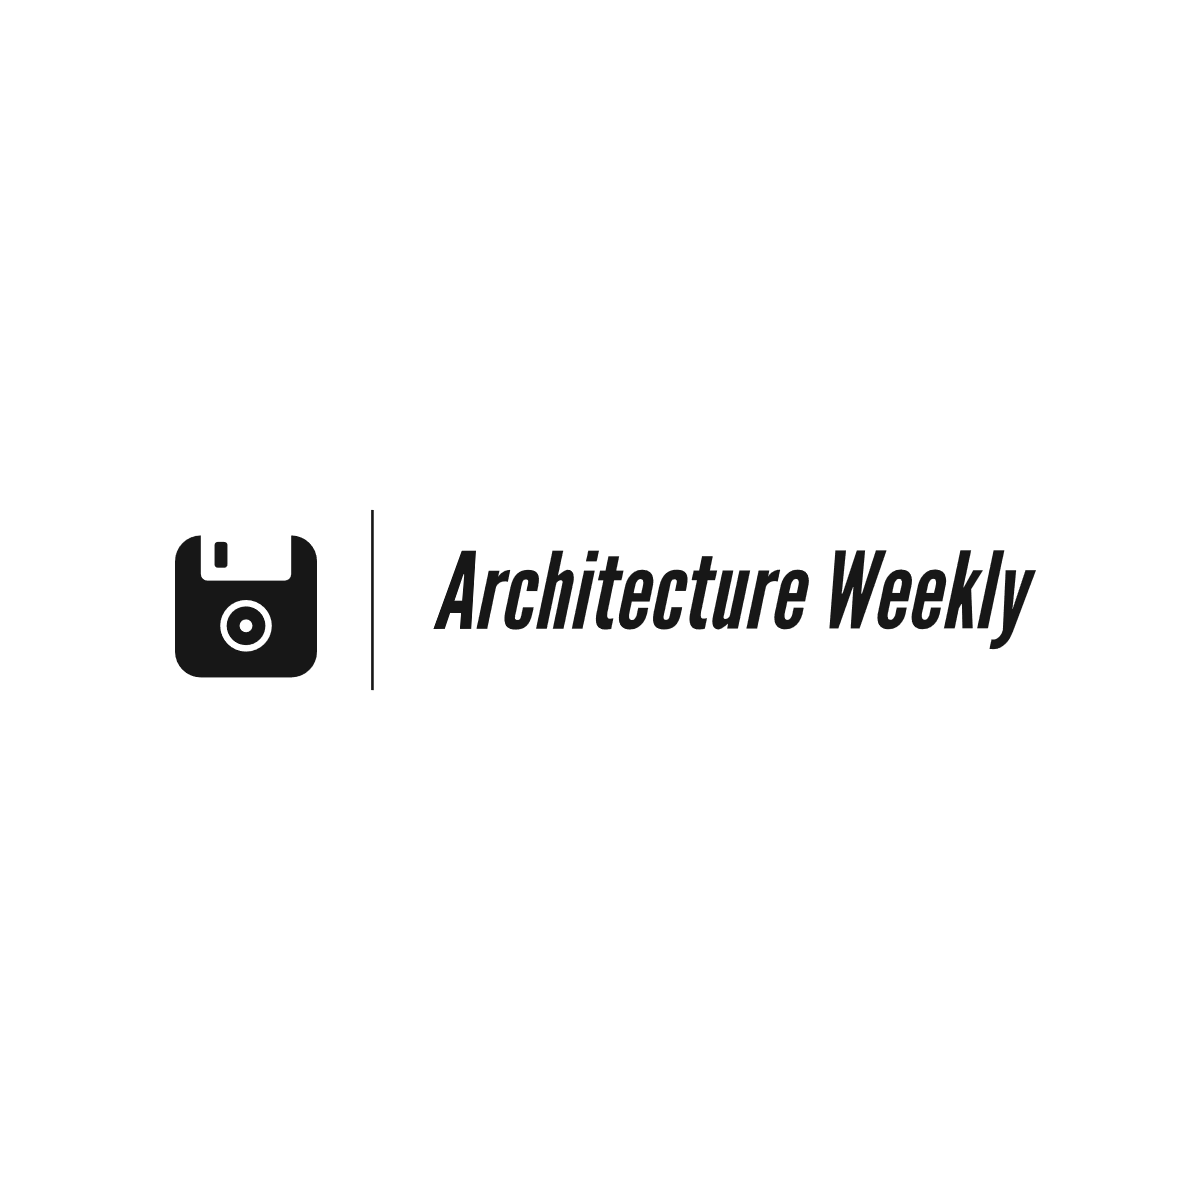 Architecture Weekly